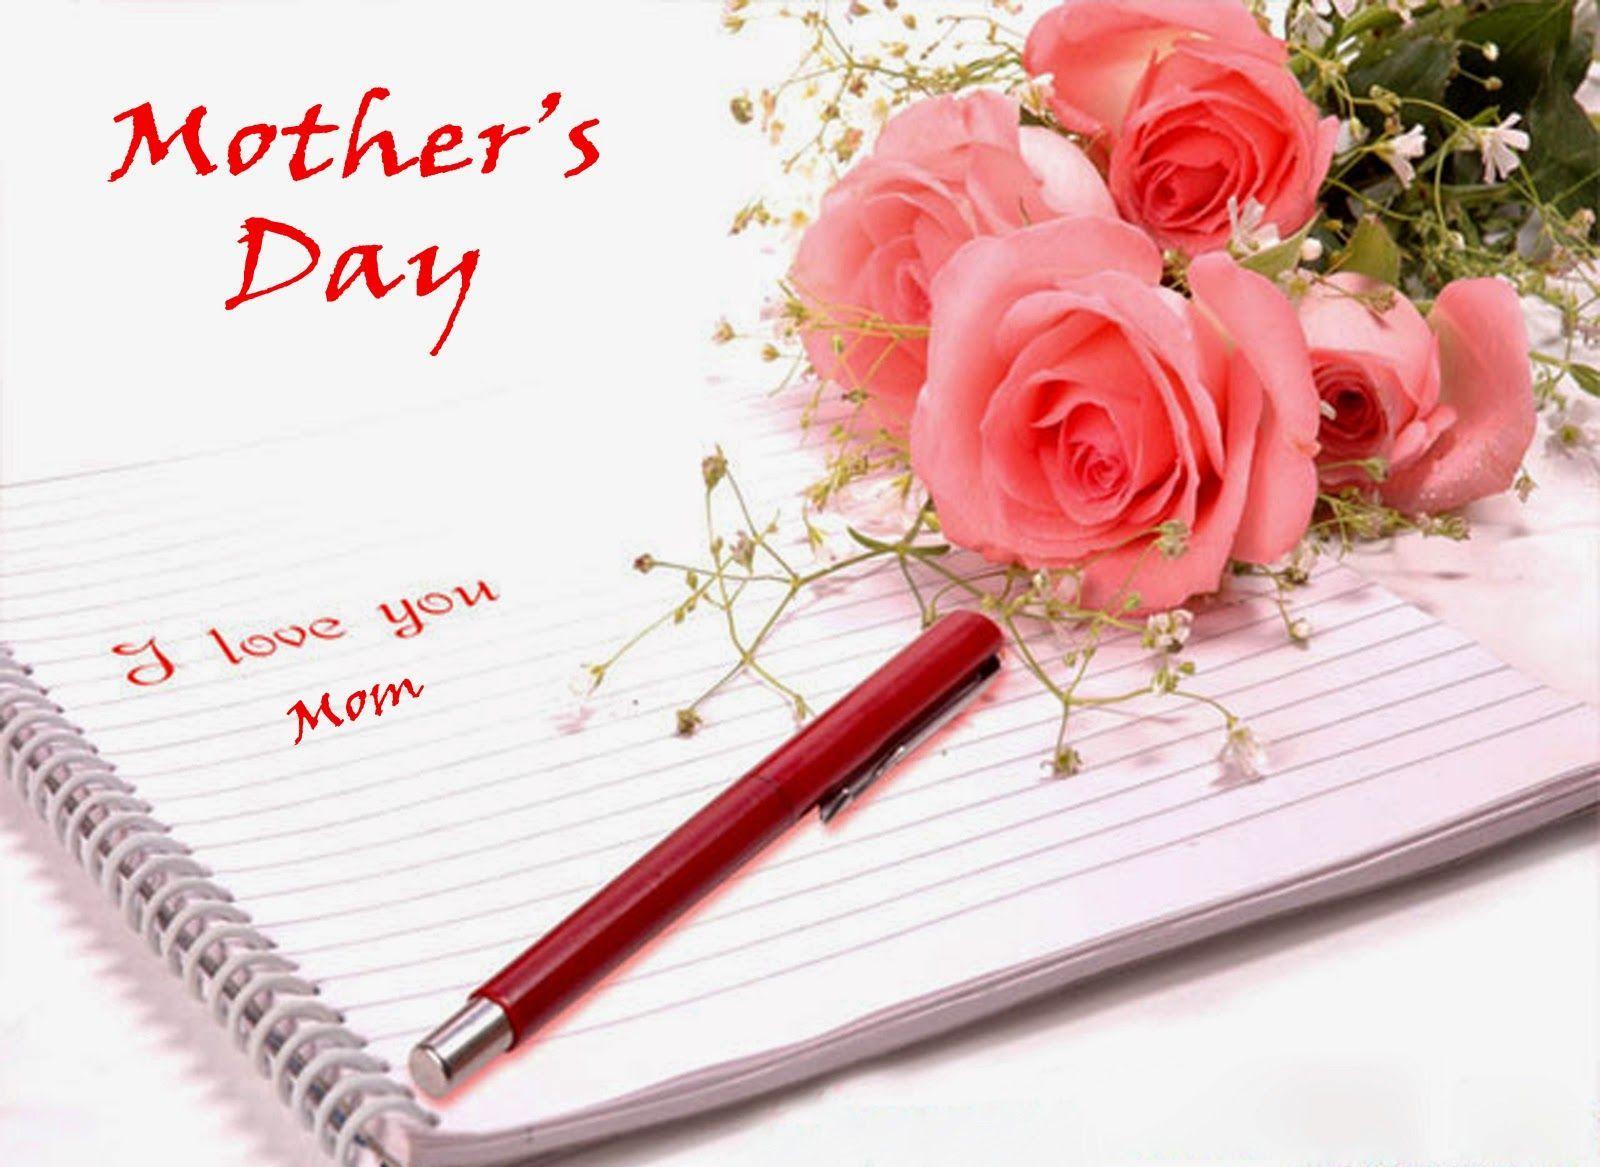 Wallpapers For > I Love You Mom Backgrounds